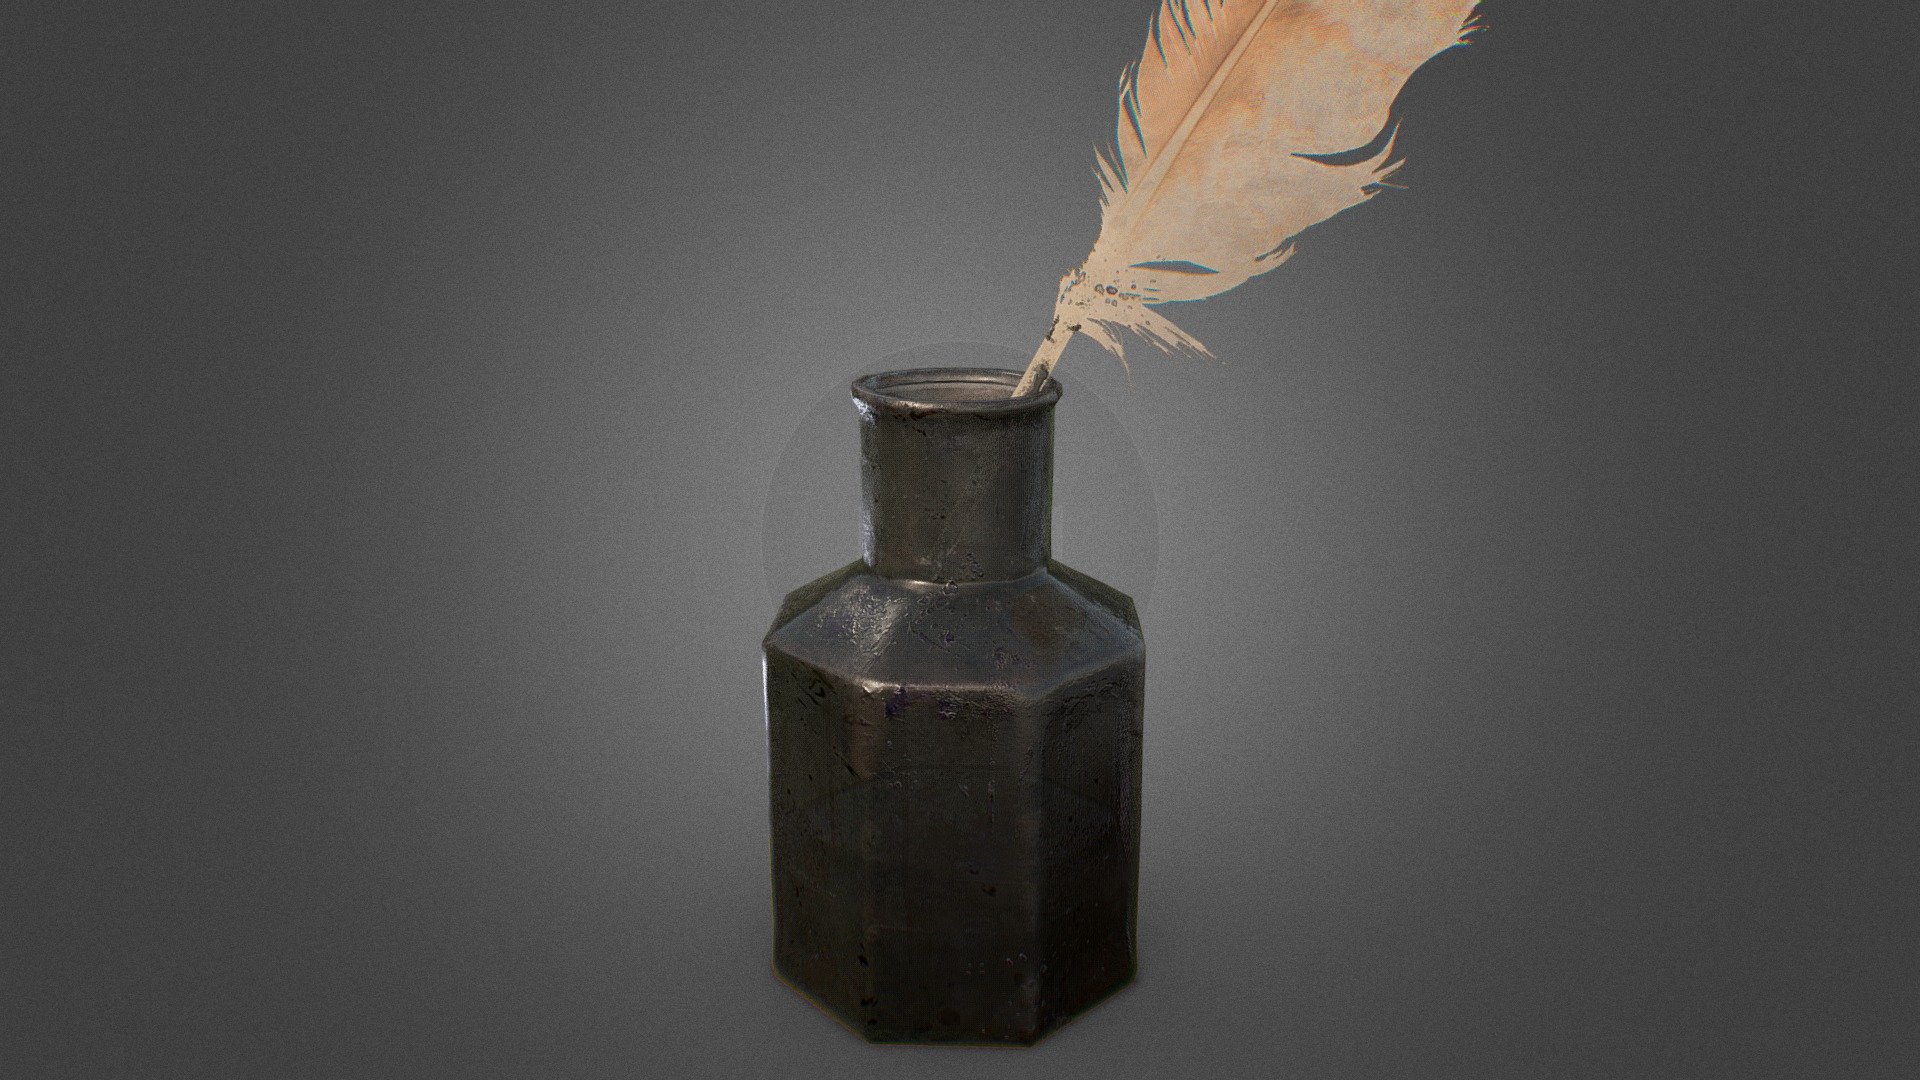 An old ink bottle with a feather quill pen. The model is low-poly and game ready 3d model